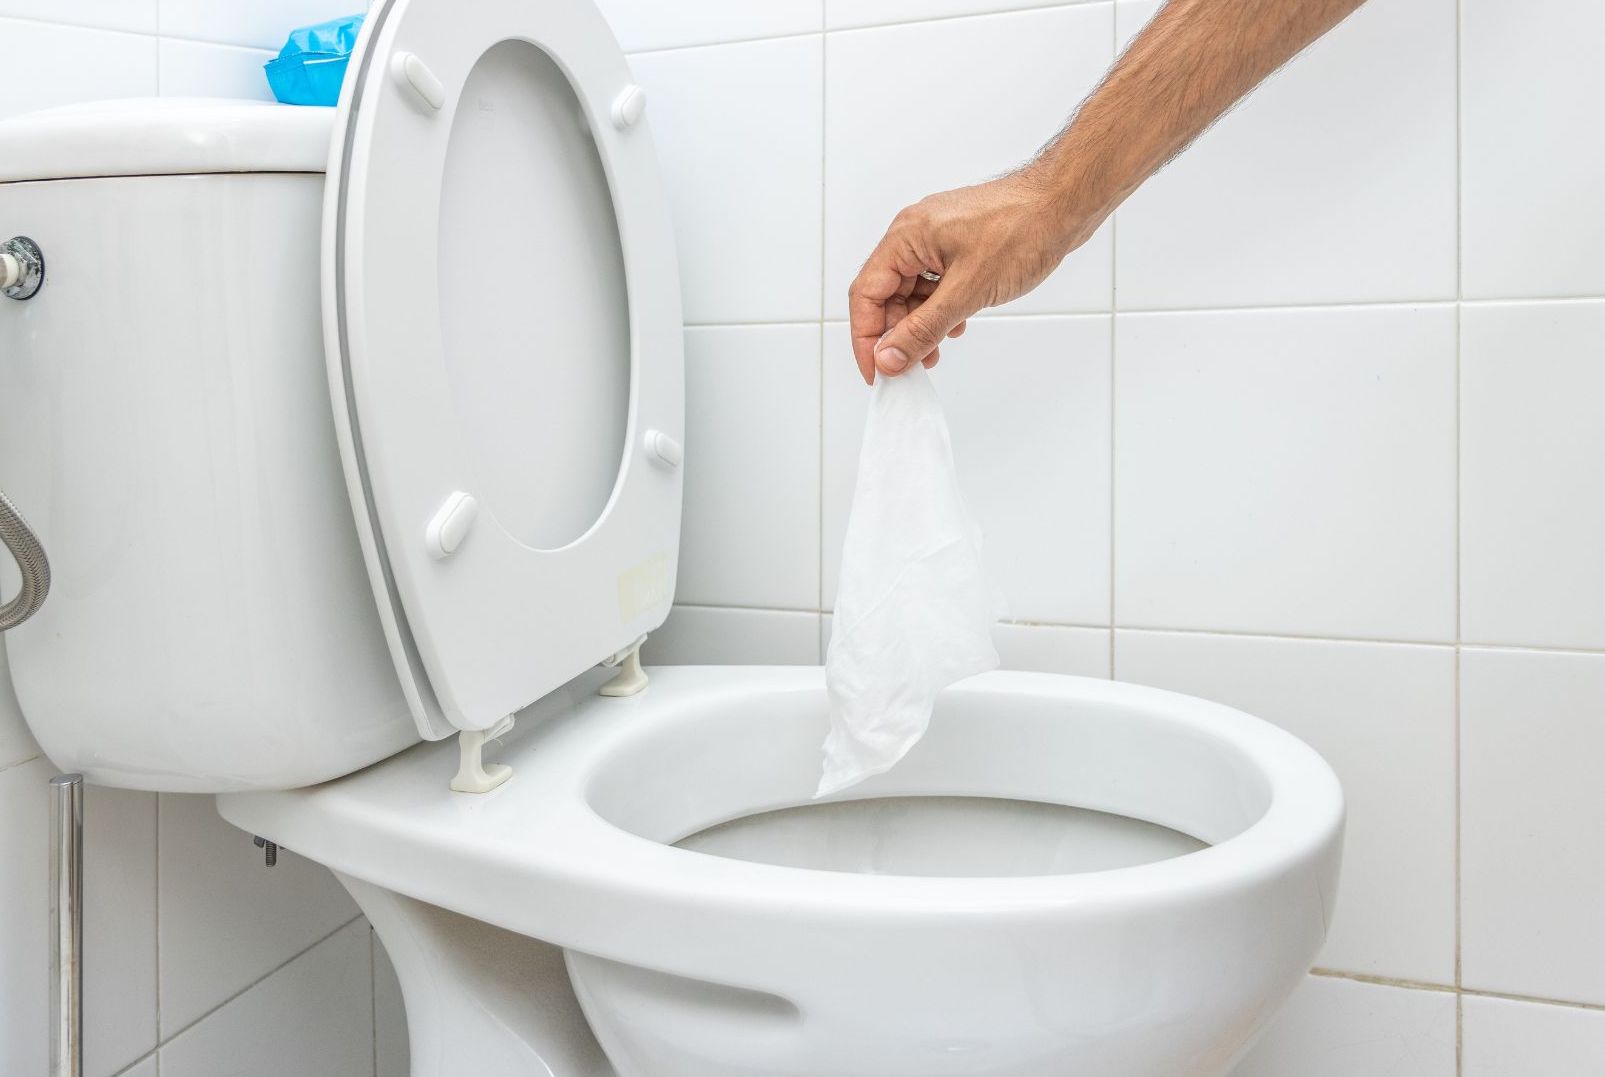 A toilet with the seat open. An arm is extended over the toilet holding a wet wipe.